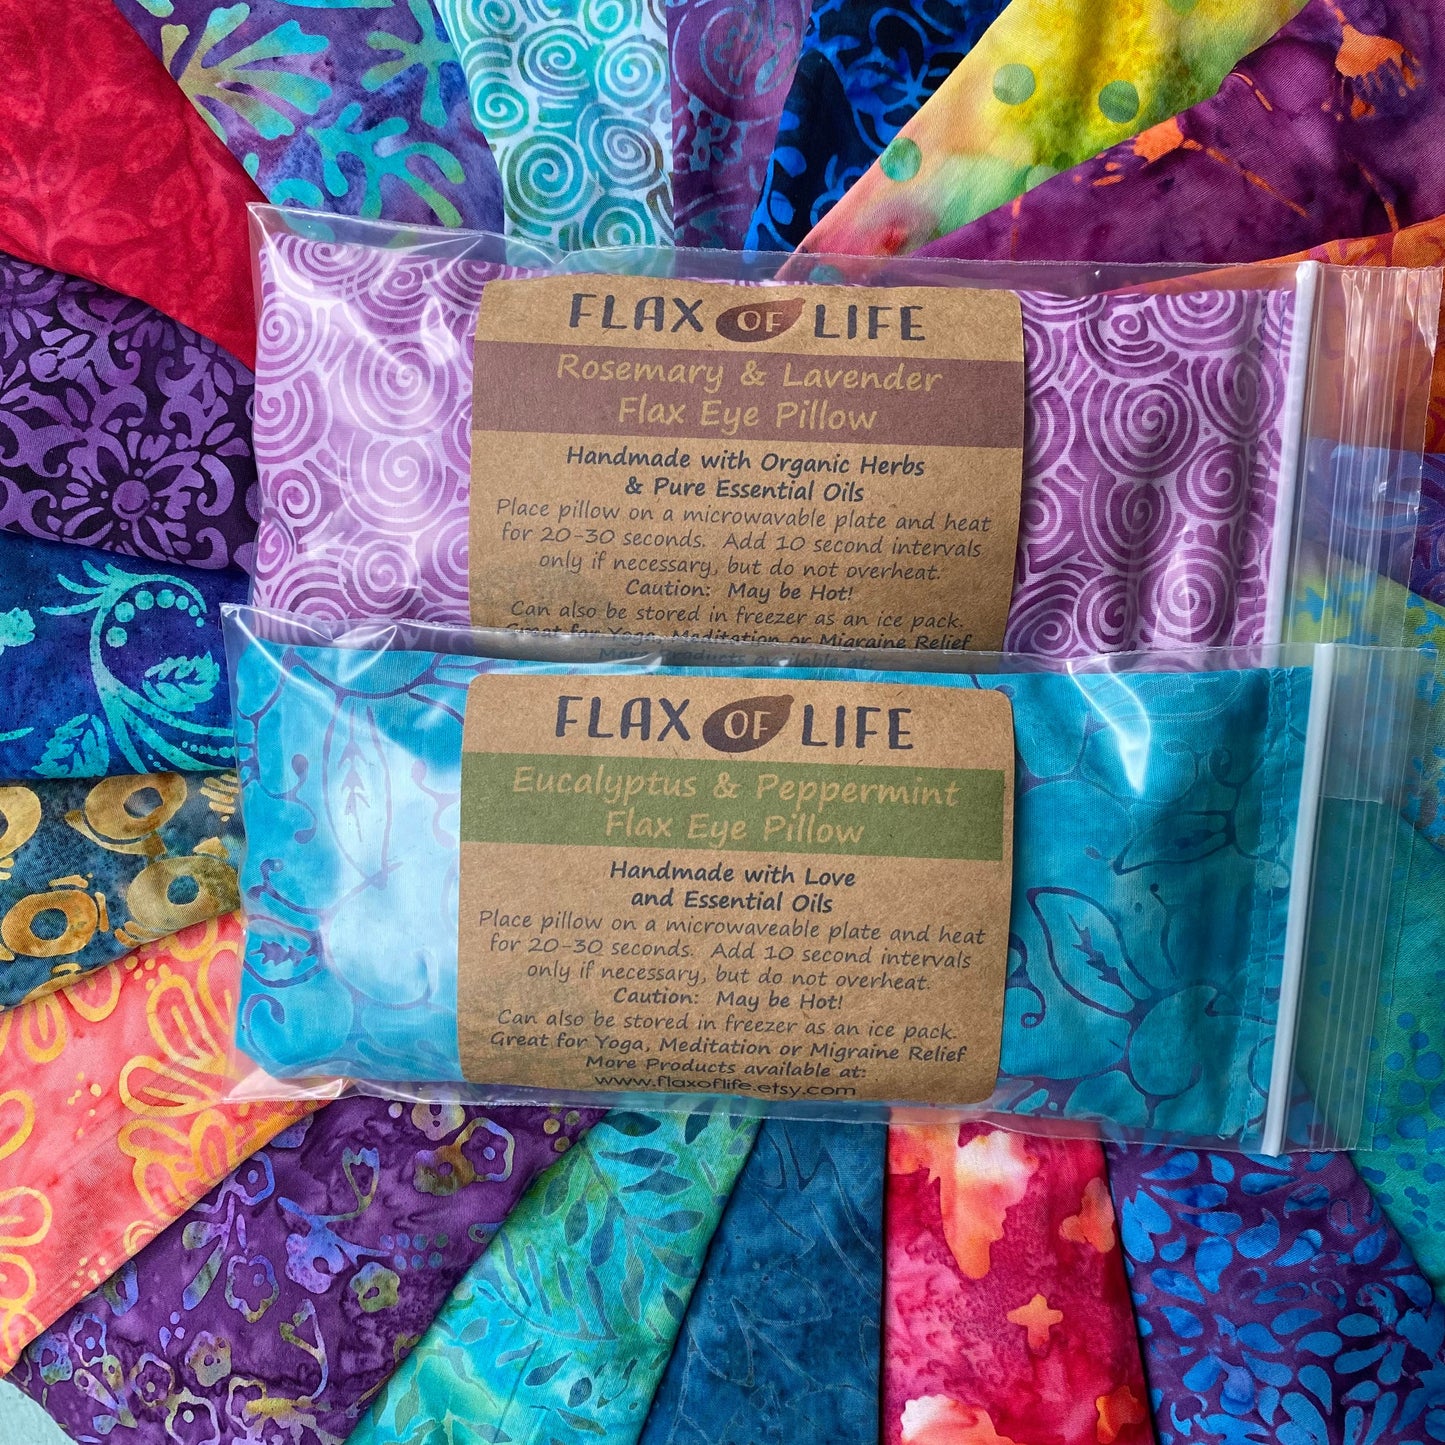 20 Hand-Dyed Batik Flax Eye Pillows with Optional Covers